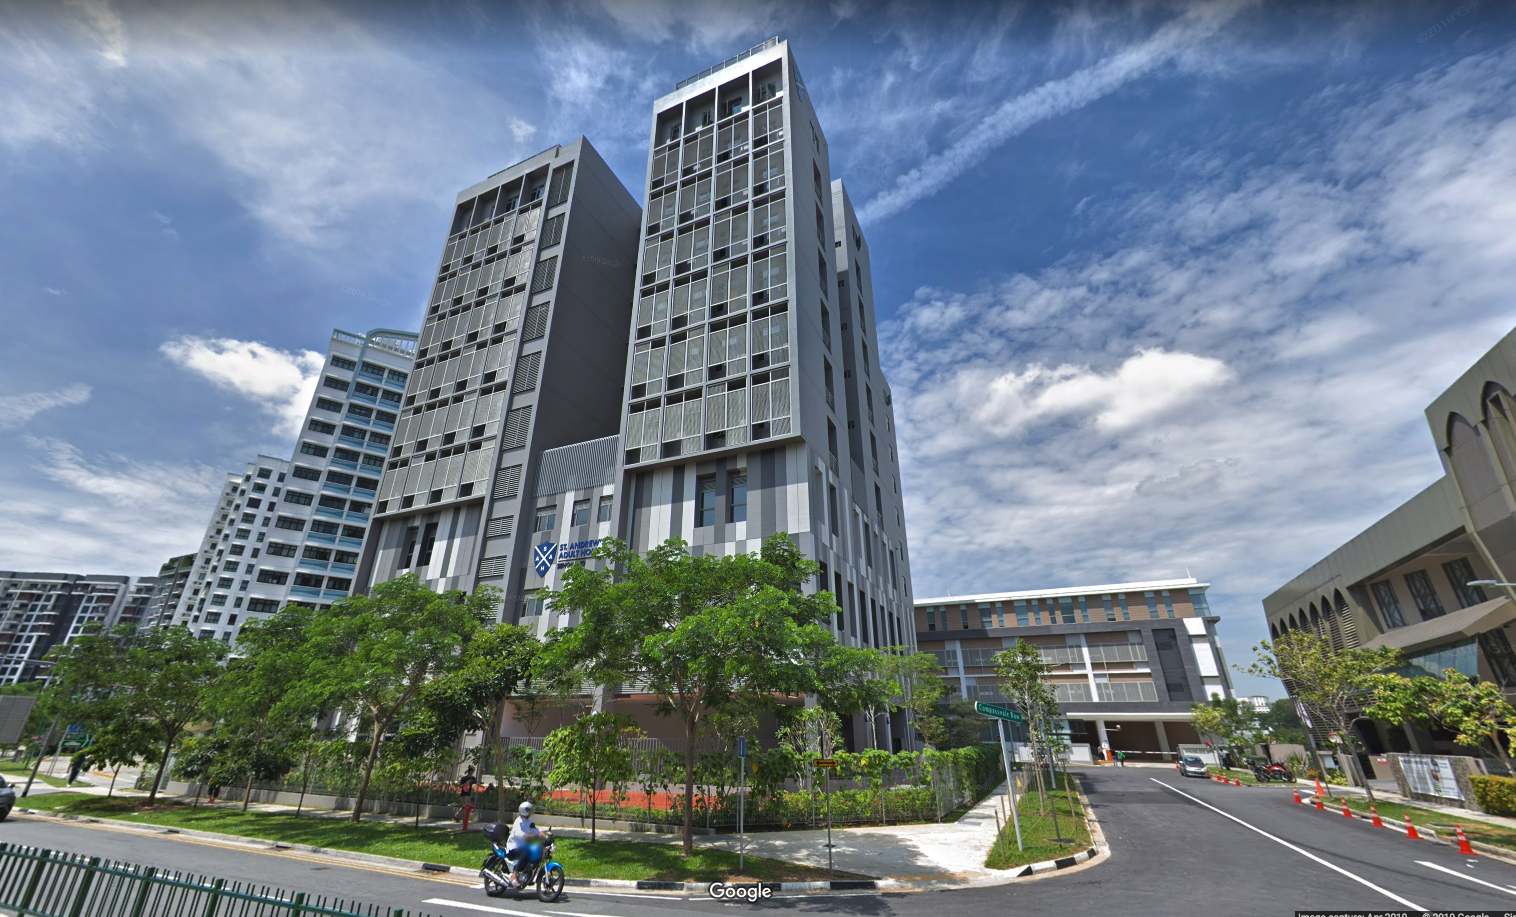 SSt Andrew's Adult Home is the first home in Singapore, specifically built for people with autism. It was completed in late 2018 and has gradually started accepting residents from April 2019. (Screenshot of the building taken from Google Maps) AAH St Andrew's Adult Home Autism